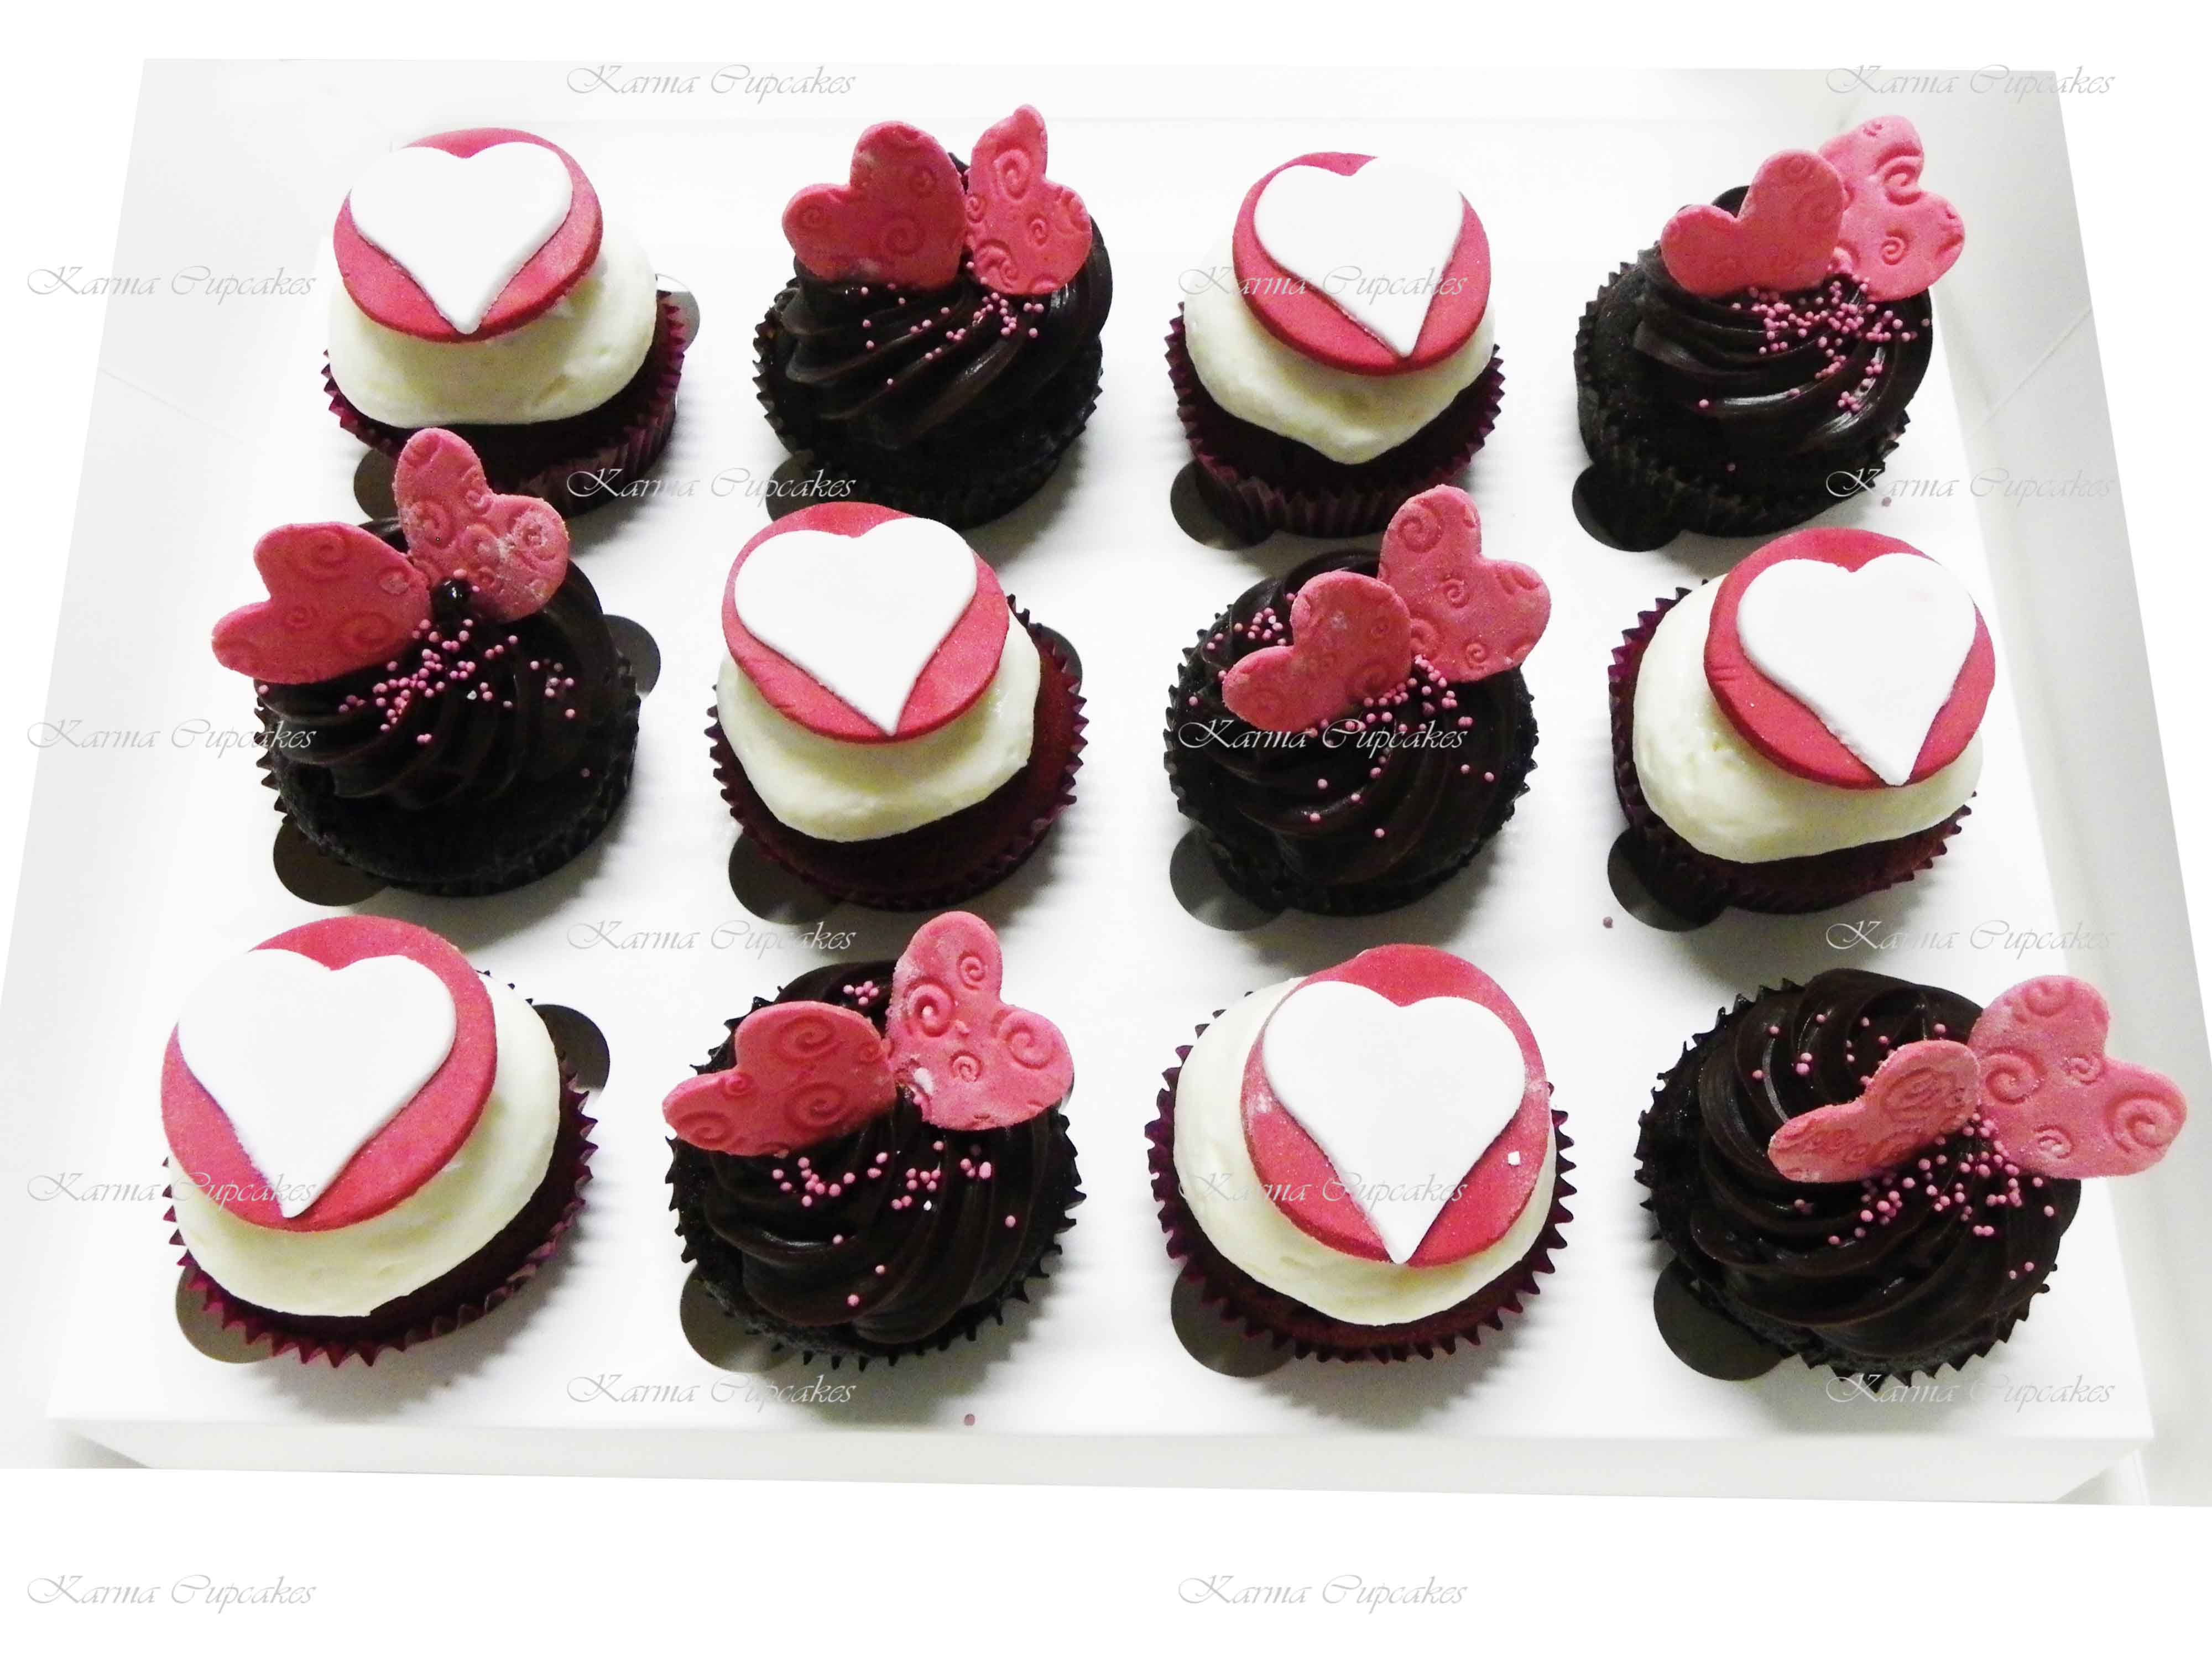 Love Heart Red Velvet and Chocolate mud cupcakes